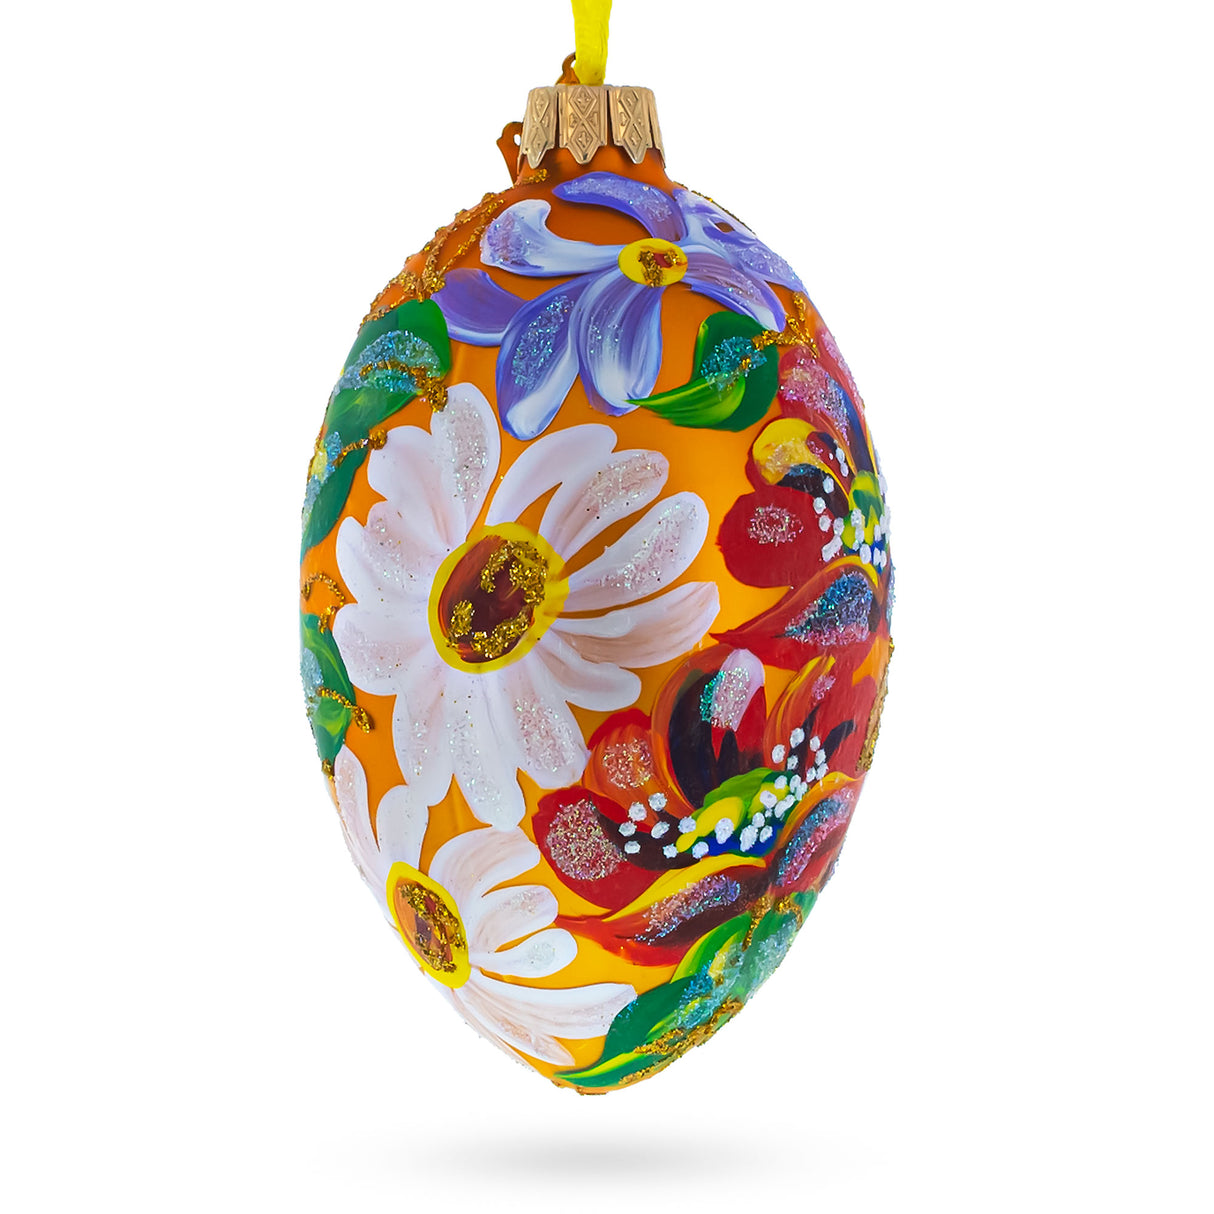 Poppy & Daisy Flowers Glass Egg Ornament 4 Inches in Orange color, Oval shape